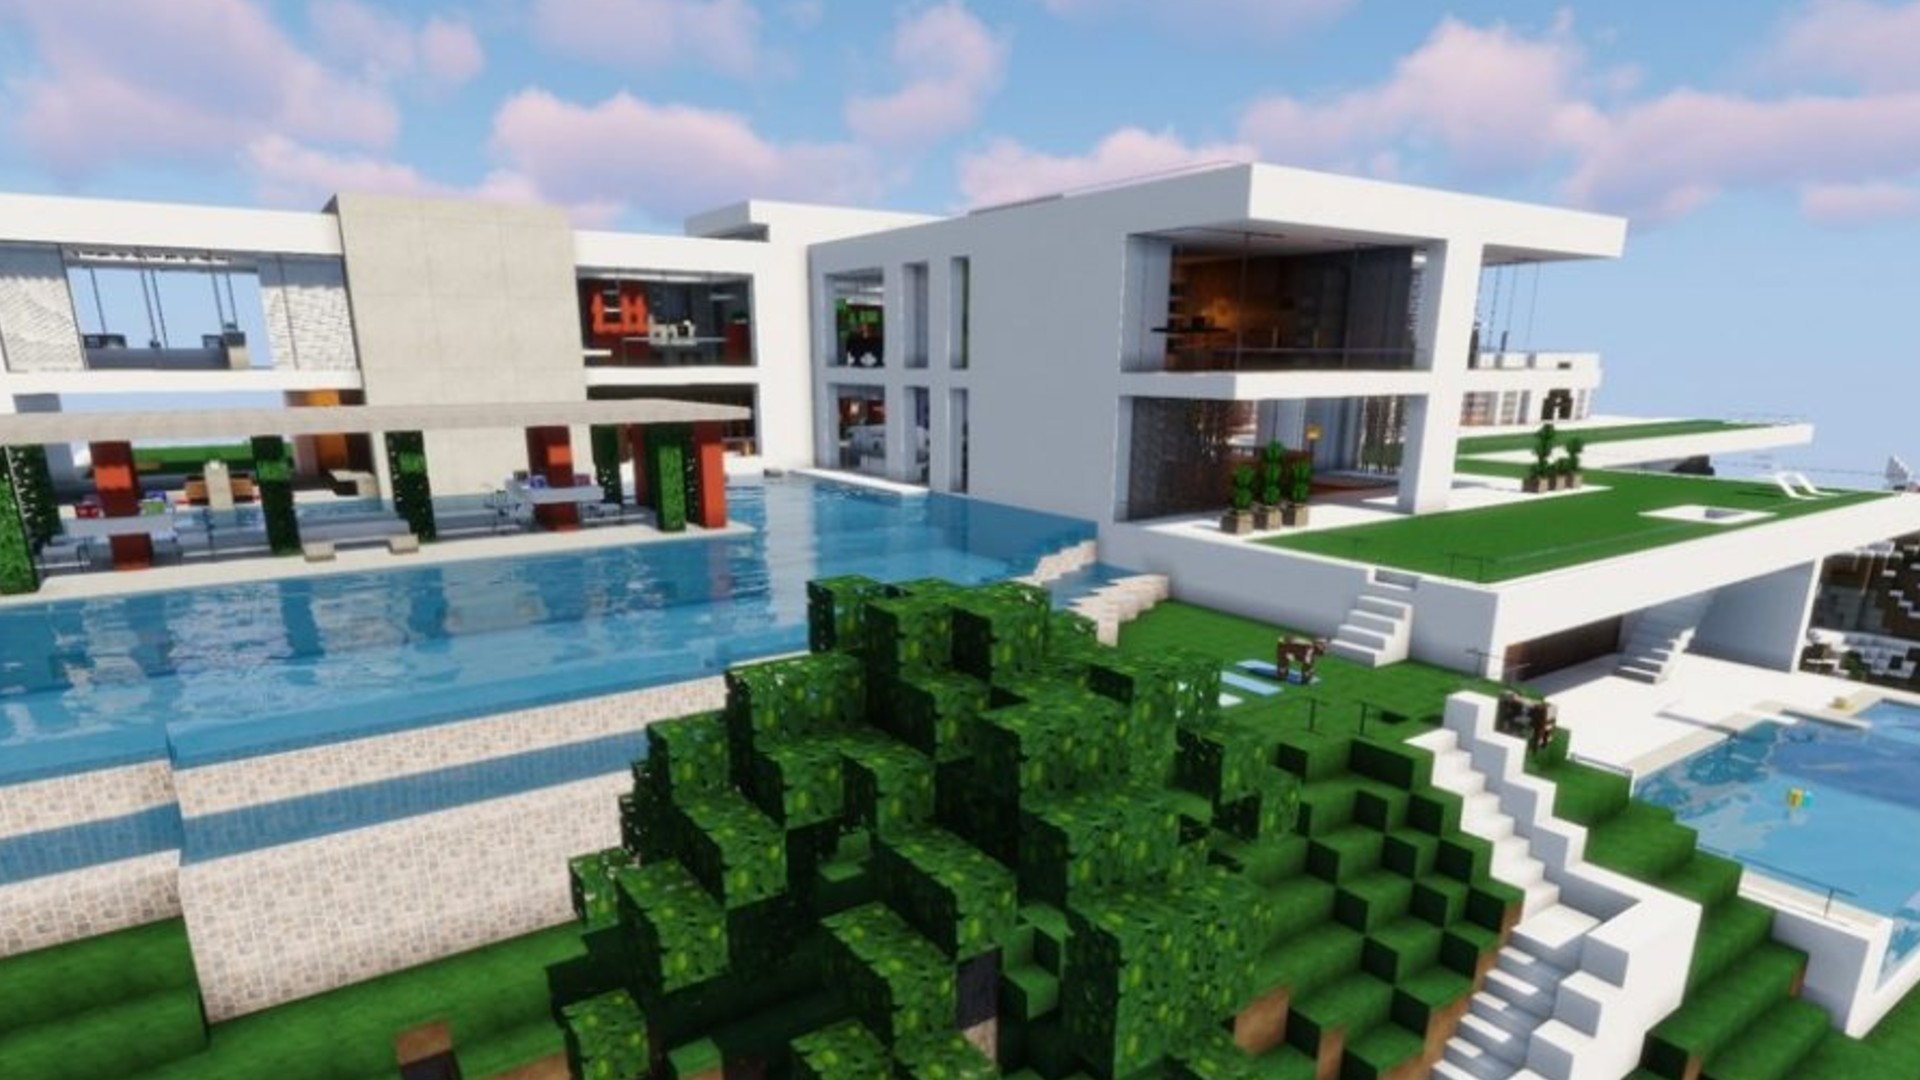 Minecraft : How to Build a Ultimate Survival House, 2 Players House